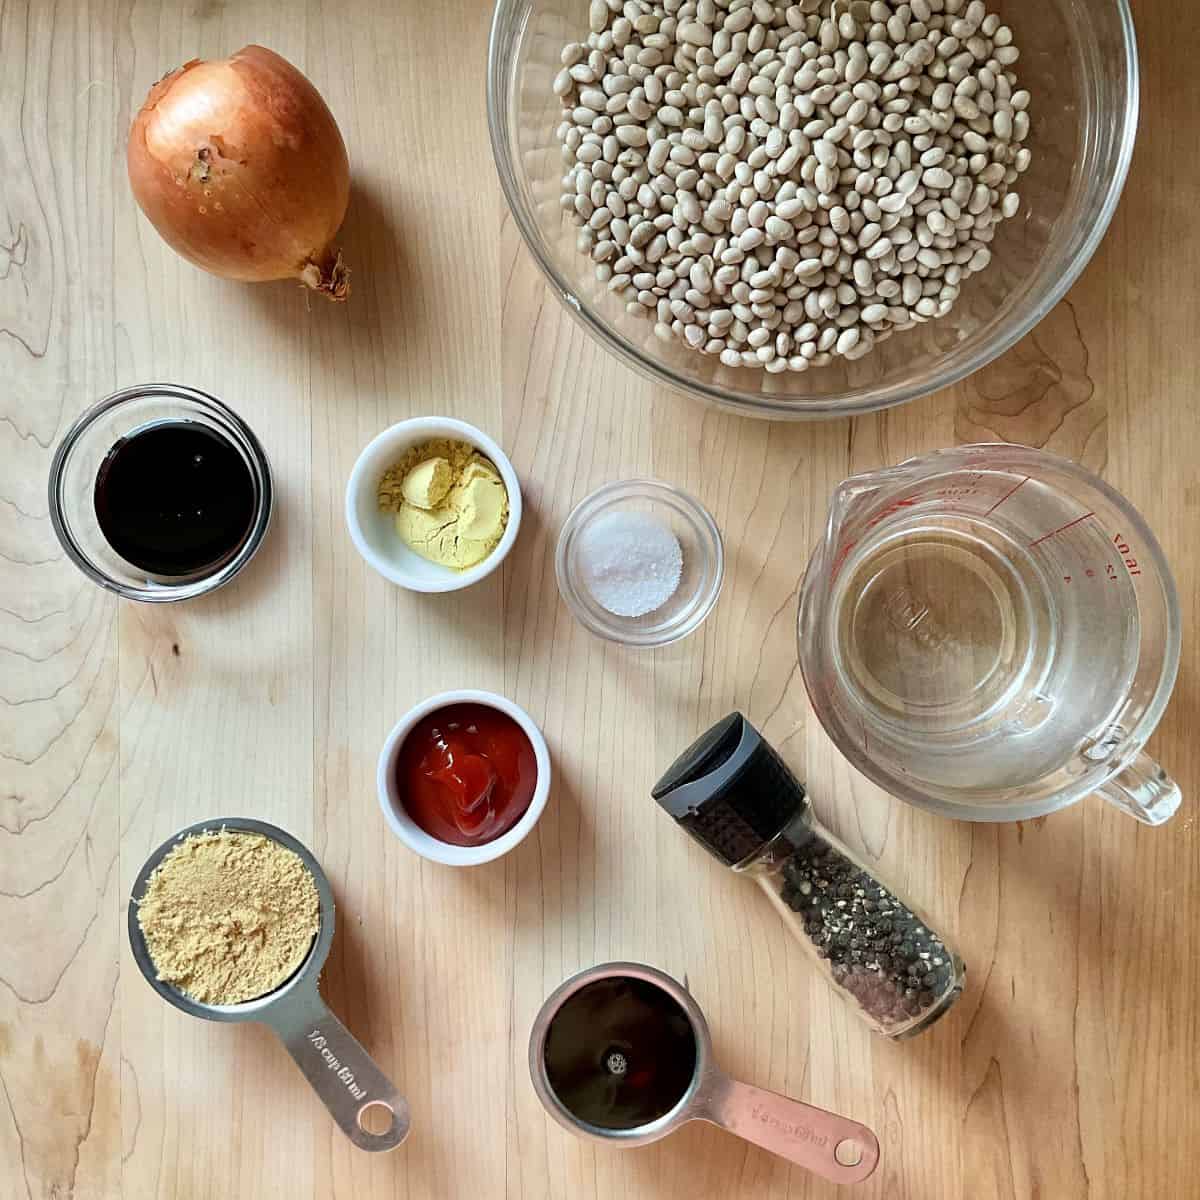 Ingredients to make baked beans on a wooden board.